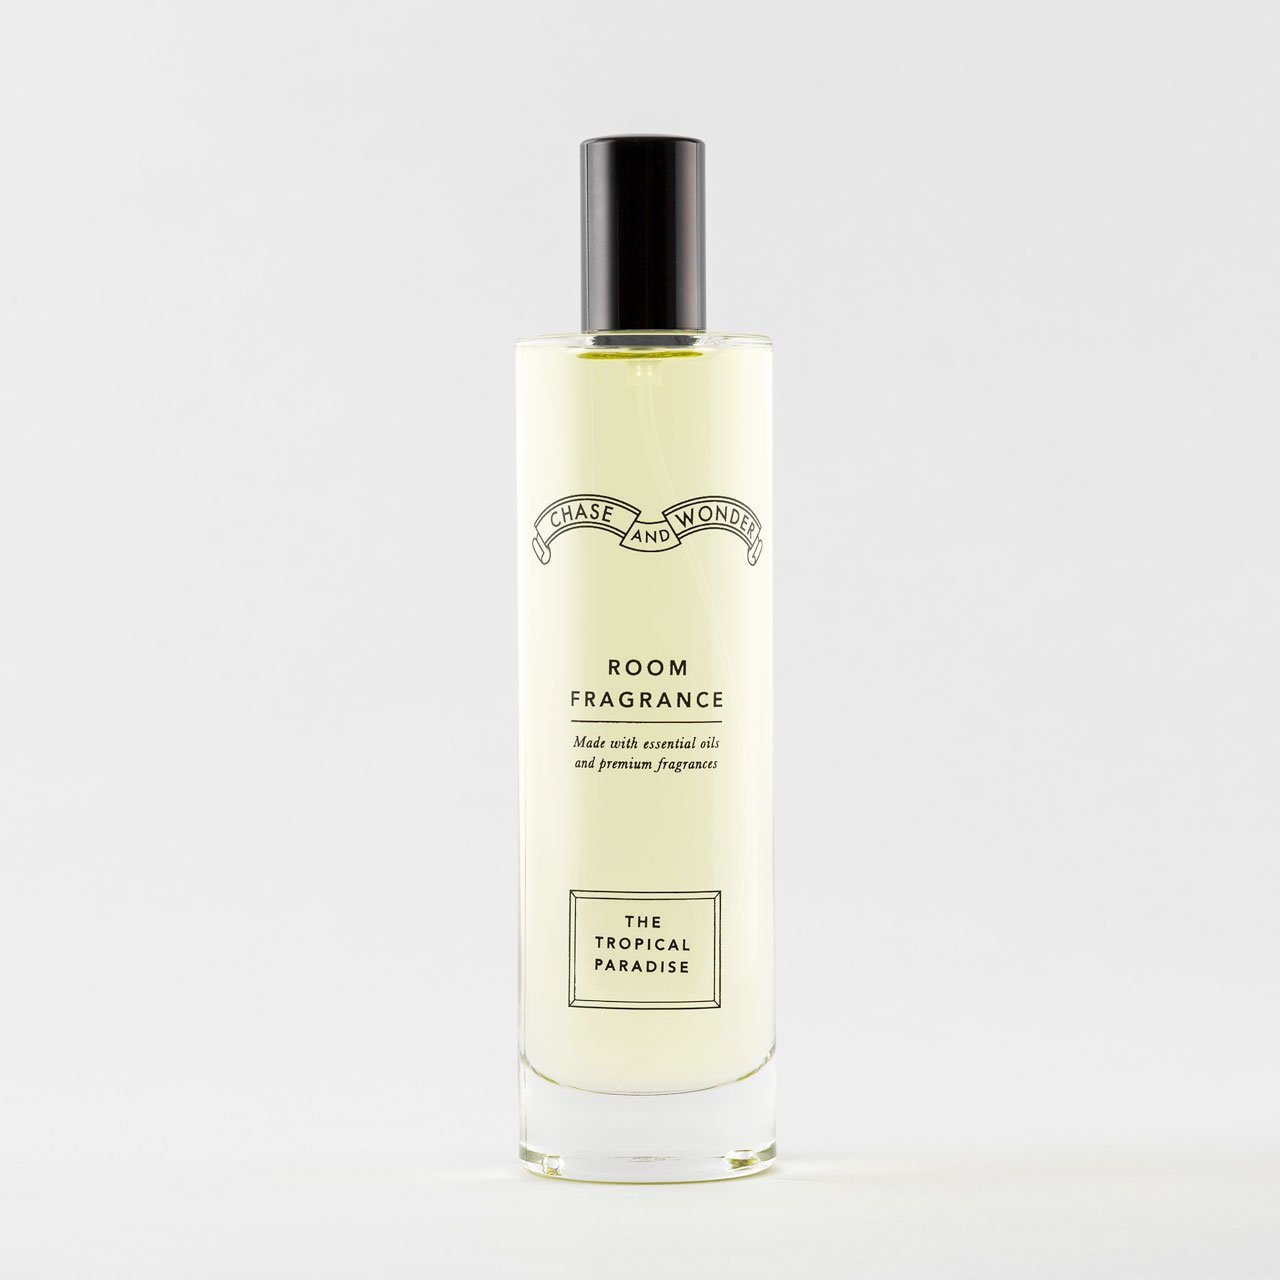 The Tropical Paradise Room Fragrance